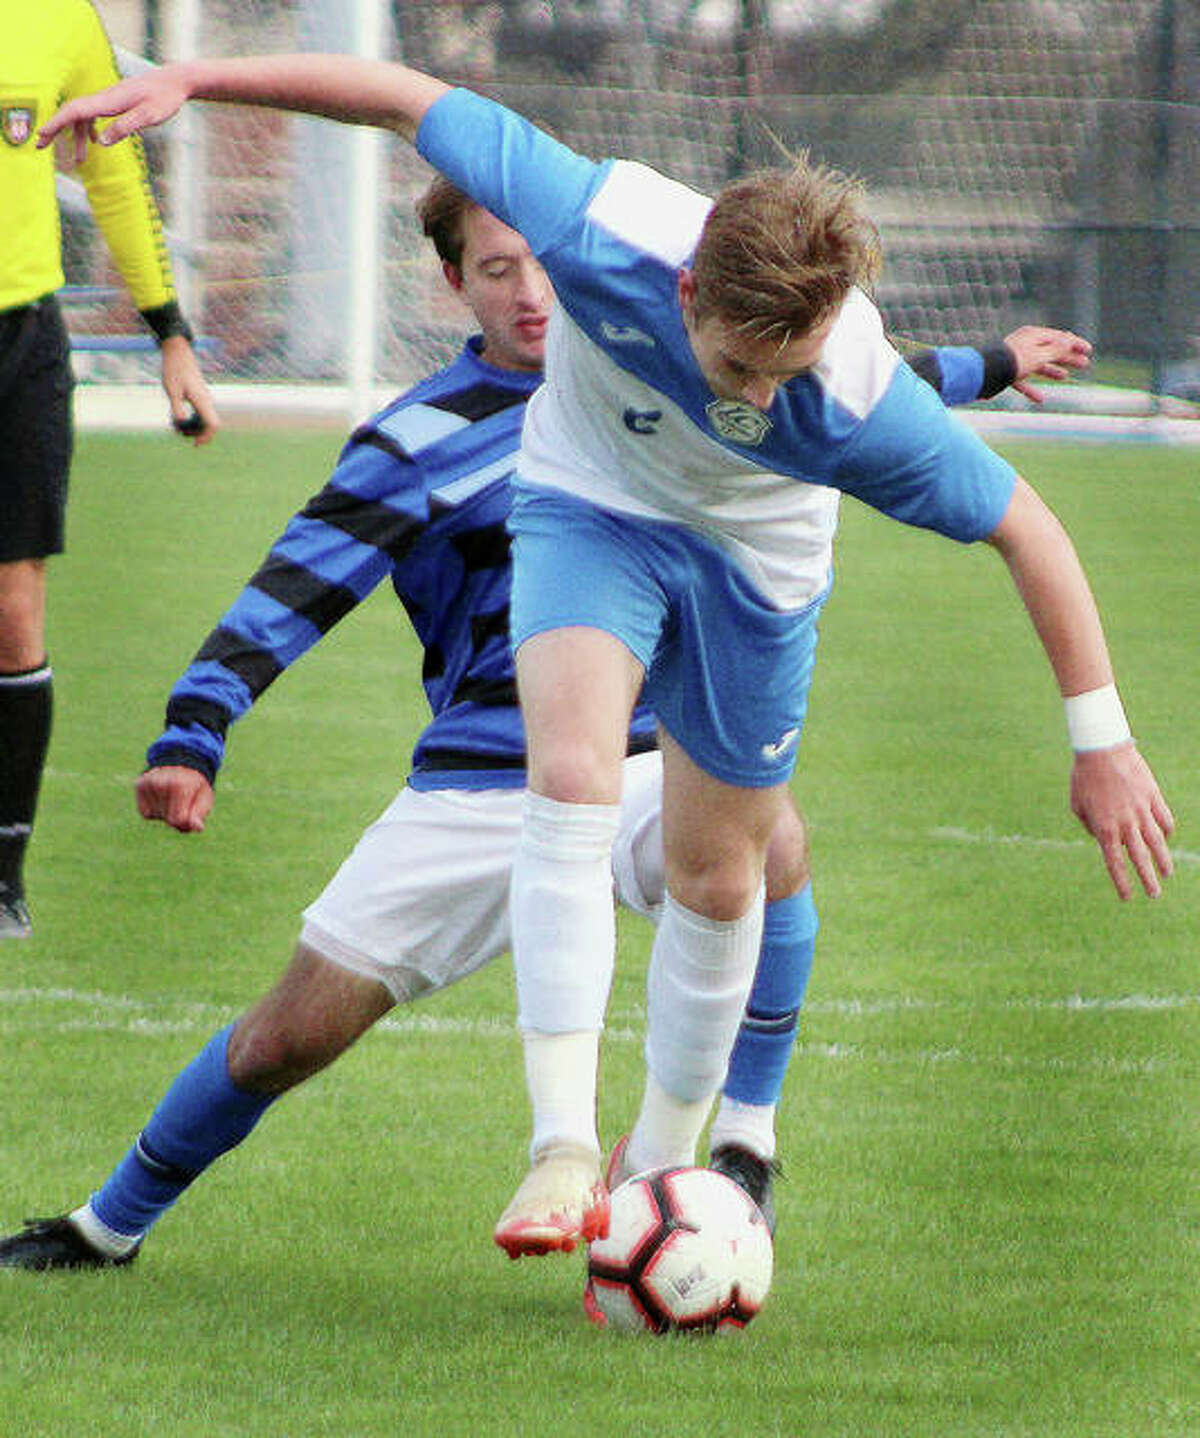 Luke Mellon of LCCC, front, scored a goal in his team’s win over No. 10-ranked Crowder College Friday. Despite the victory and a four-game winning streak, LCCC received no votes in this week’s NJCAA Division I National Soccer Poll.